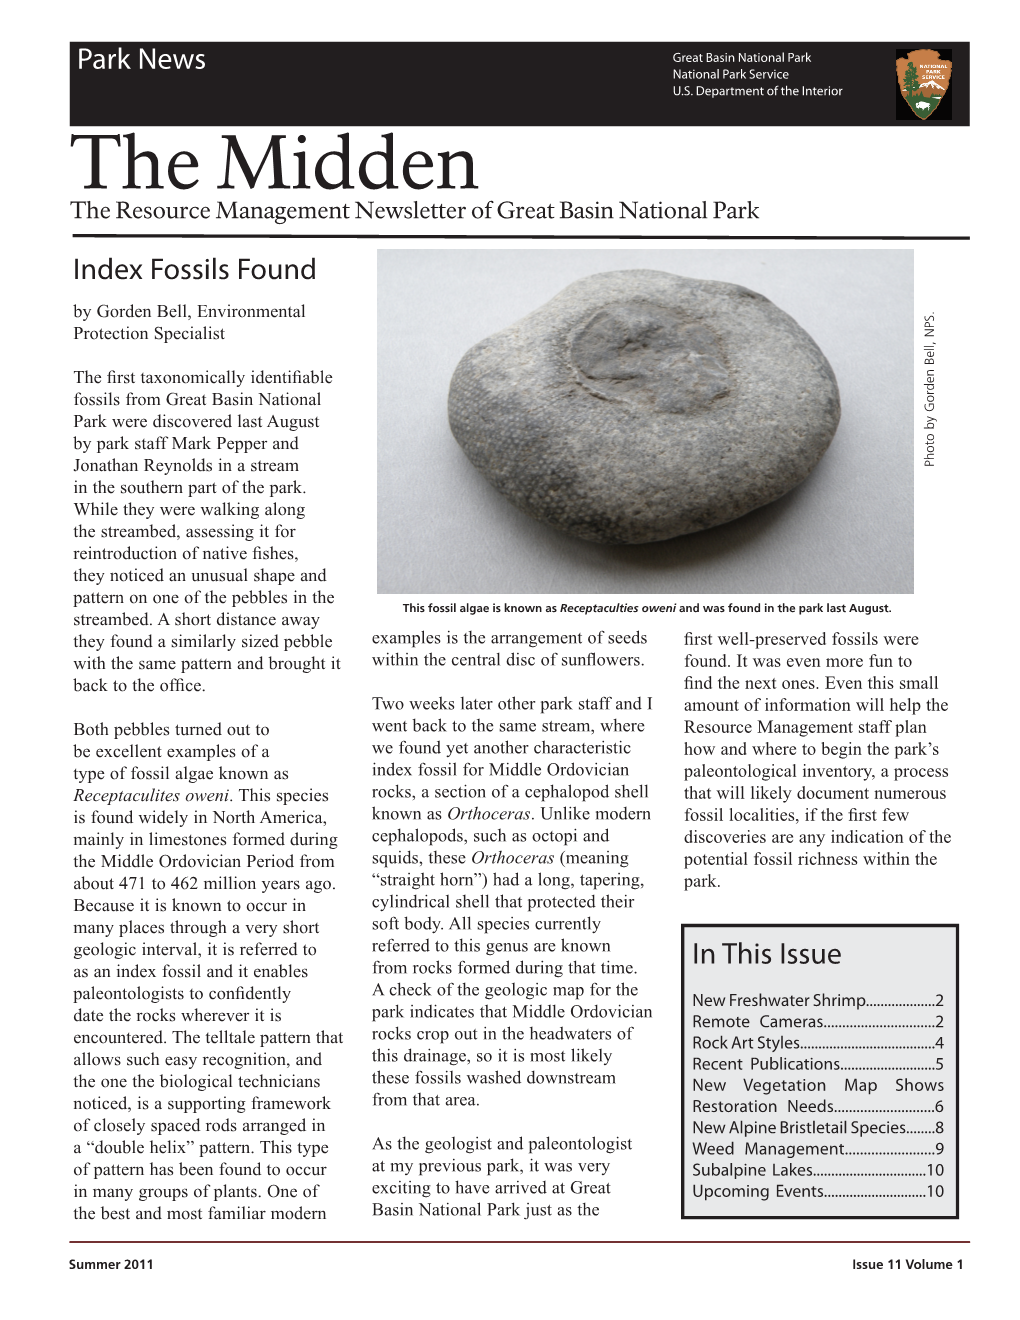 The Midden the Resource Management Newsletter of Great Basin National Park